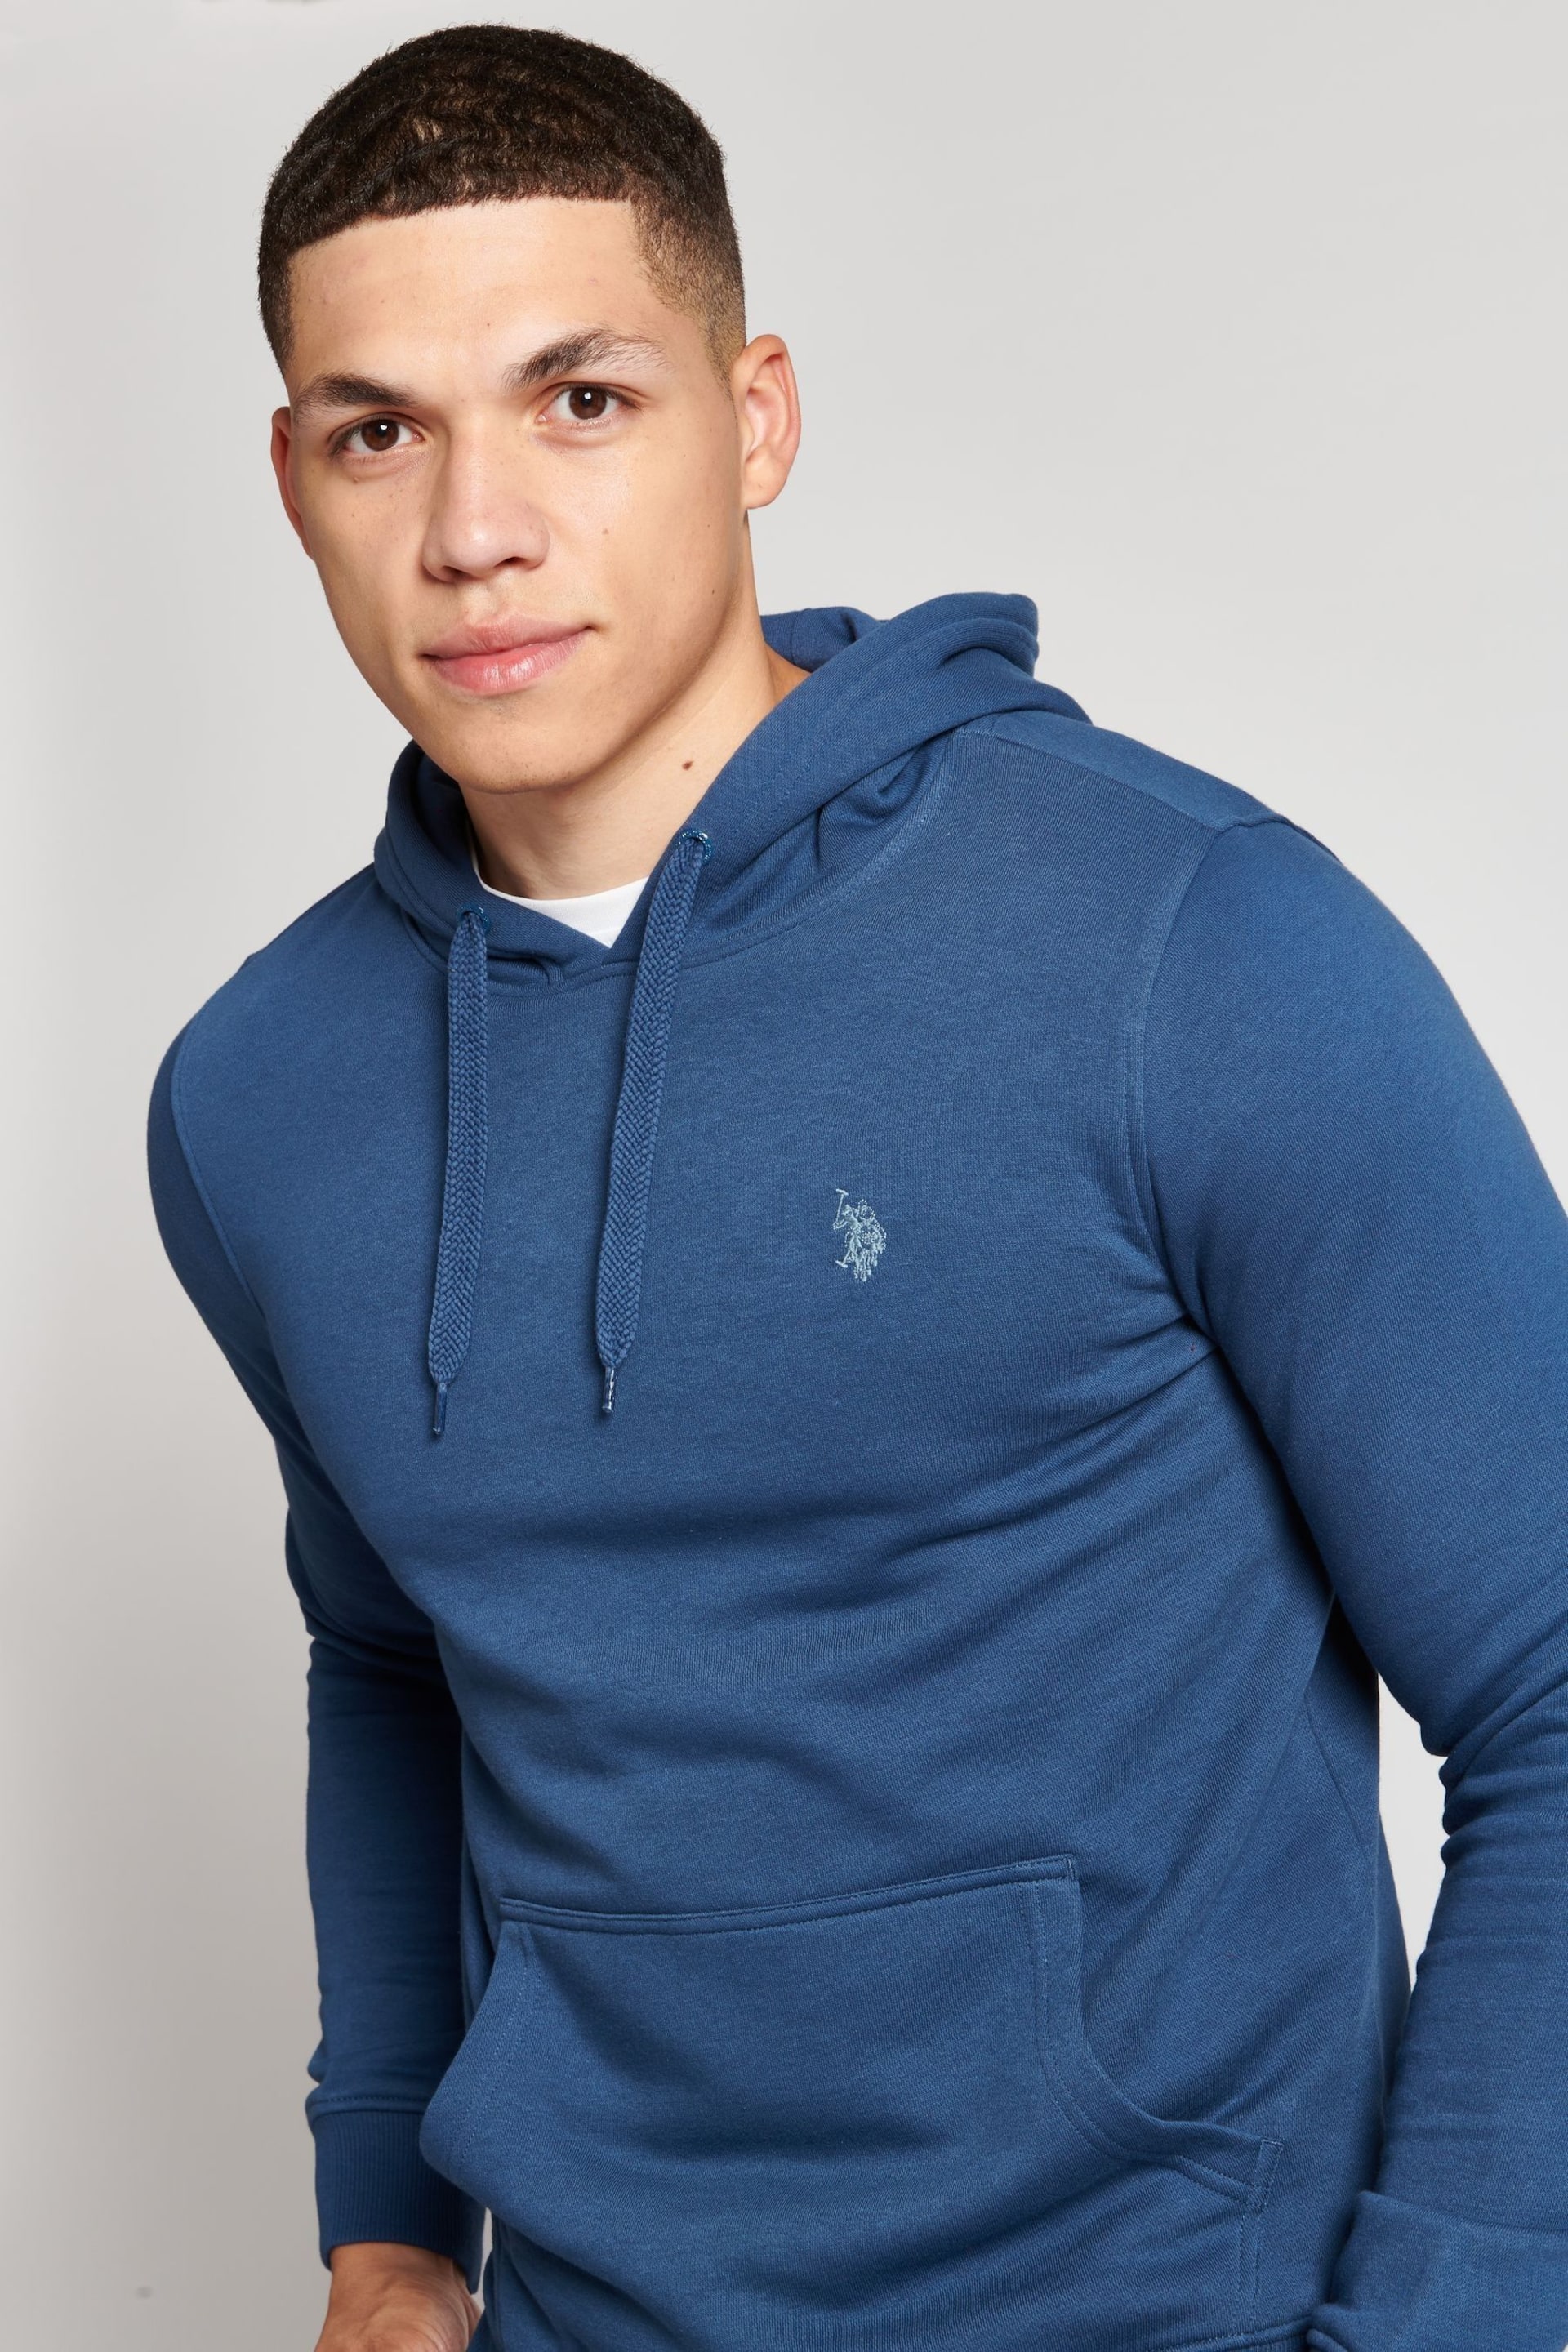 U.S. Polo Assn. Mens BlueSolid DHM Overhead Hoodie - Image 3 of 3